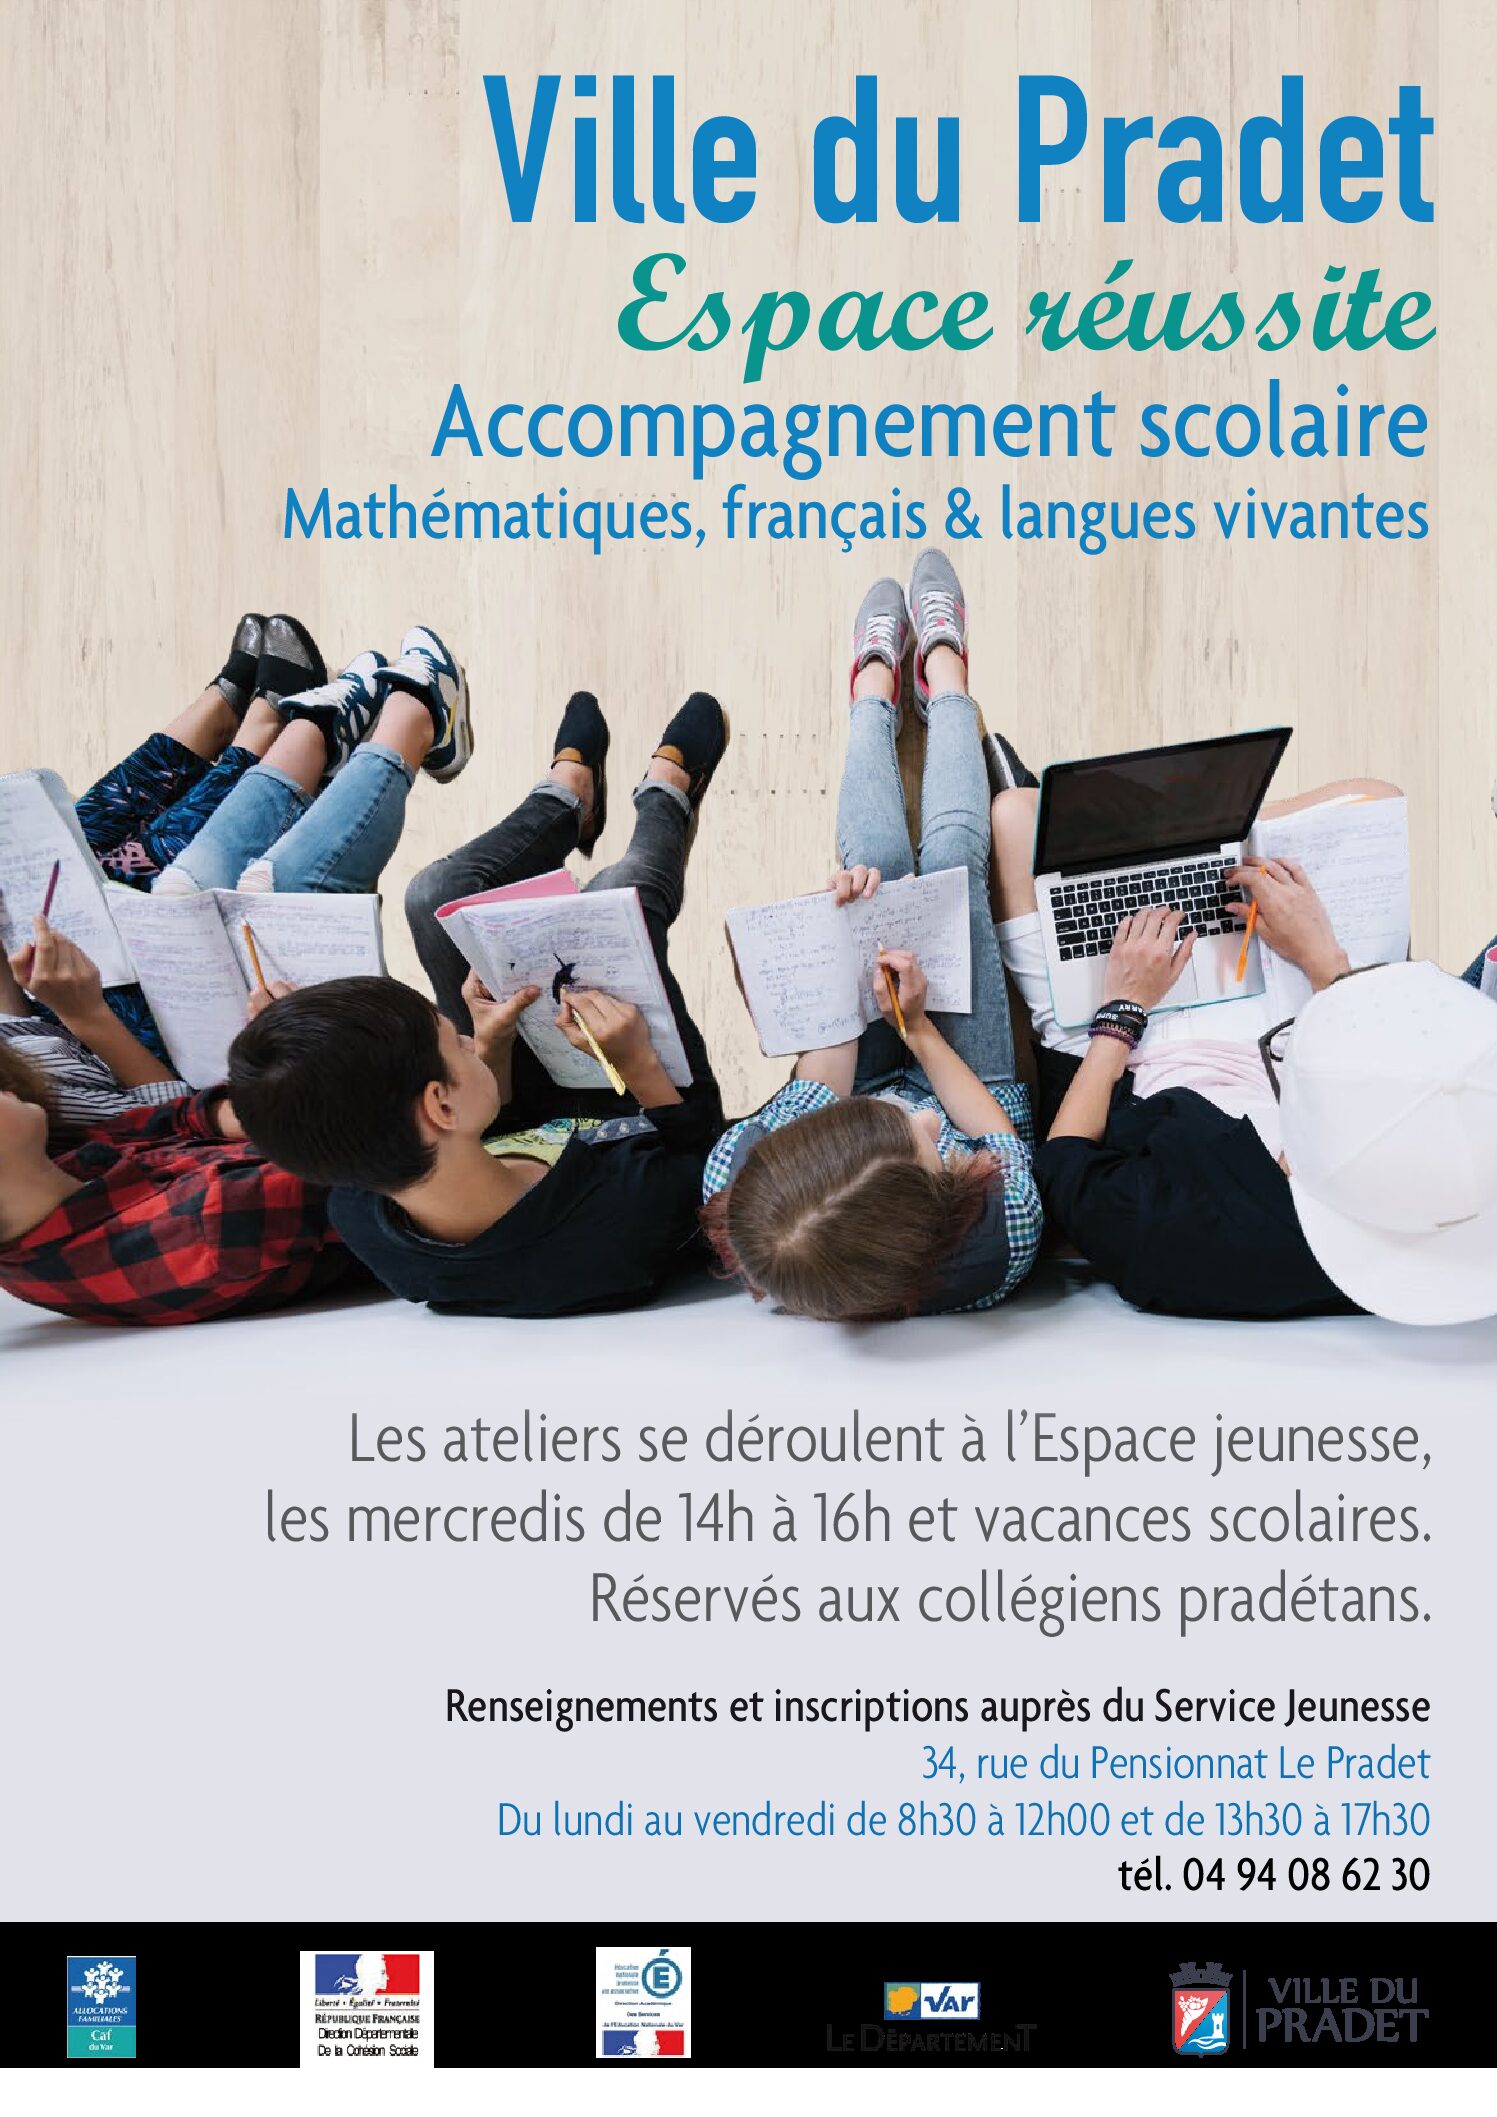 Accompagnement scolaire – CLAS